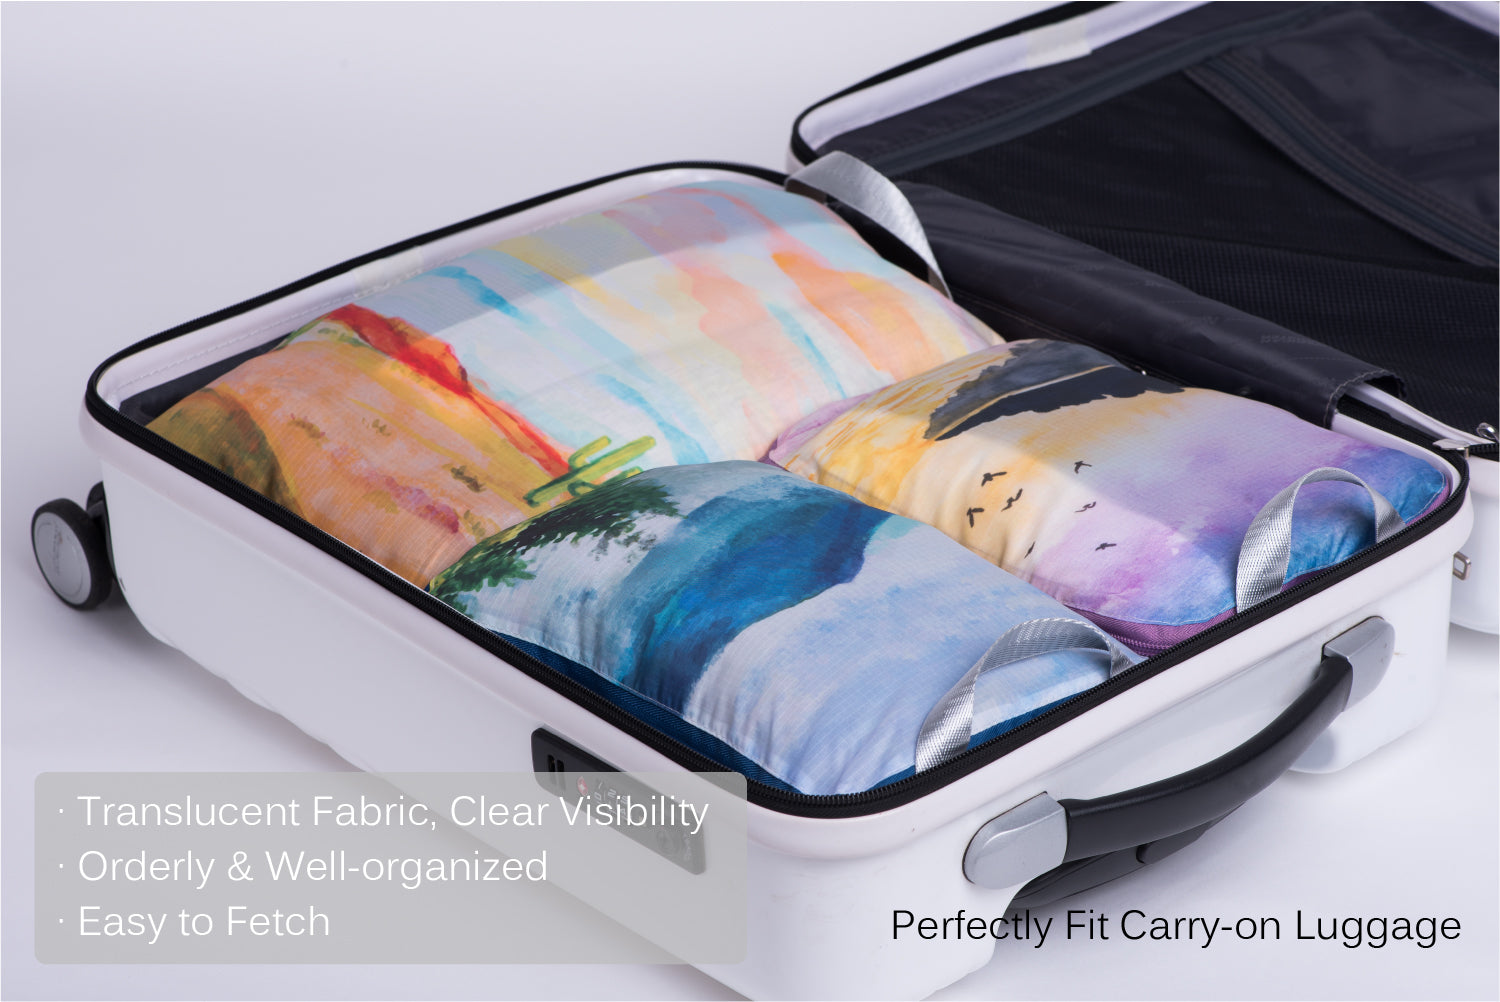 Carry Craft 3 Piece Packing Cubes Travel Organizer Set for Luggage